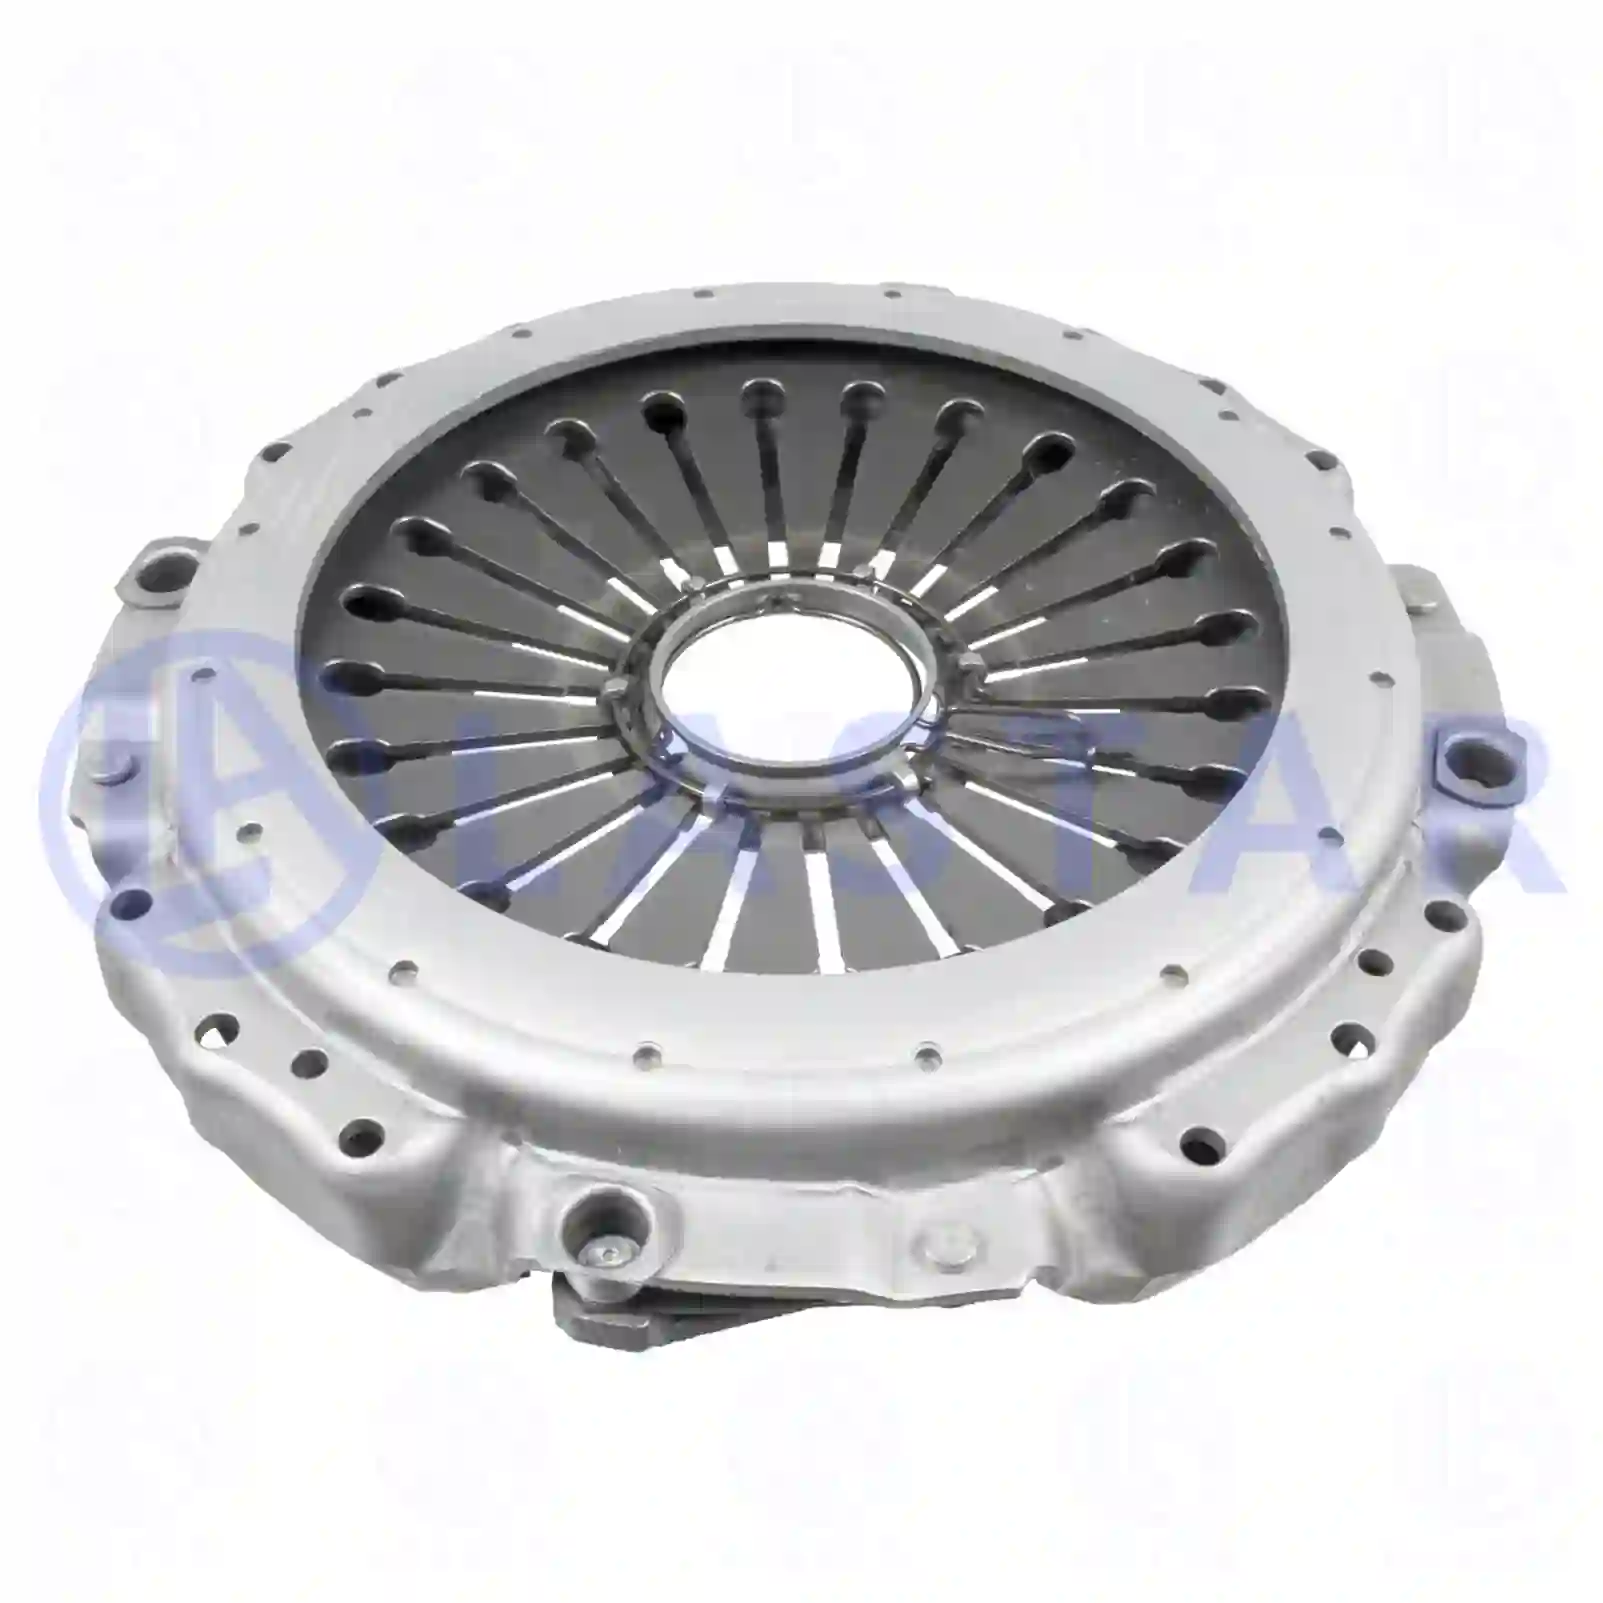 Clutch cover, 77723133, 1513719, 151372 ||  77723133 Lastar Spare Part | Truck Spare Parts, Auotomotive Spare Parts Clutch cover, 77723133, 1513719, 151372 ||  77723133 Lastar Spare Part | Truck Spare Parts, Auotomotive Spare Parts